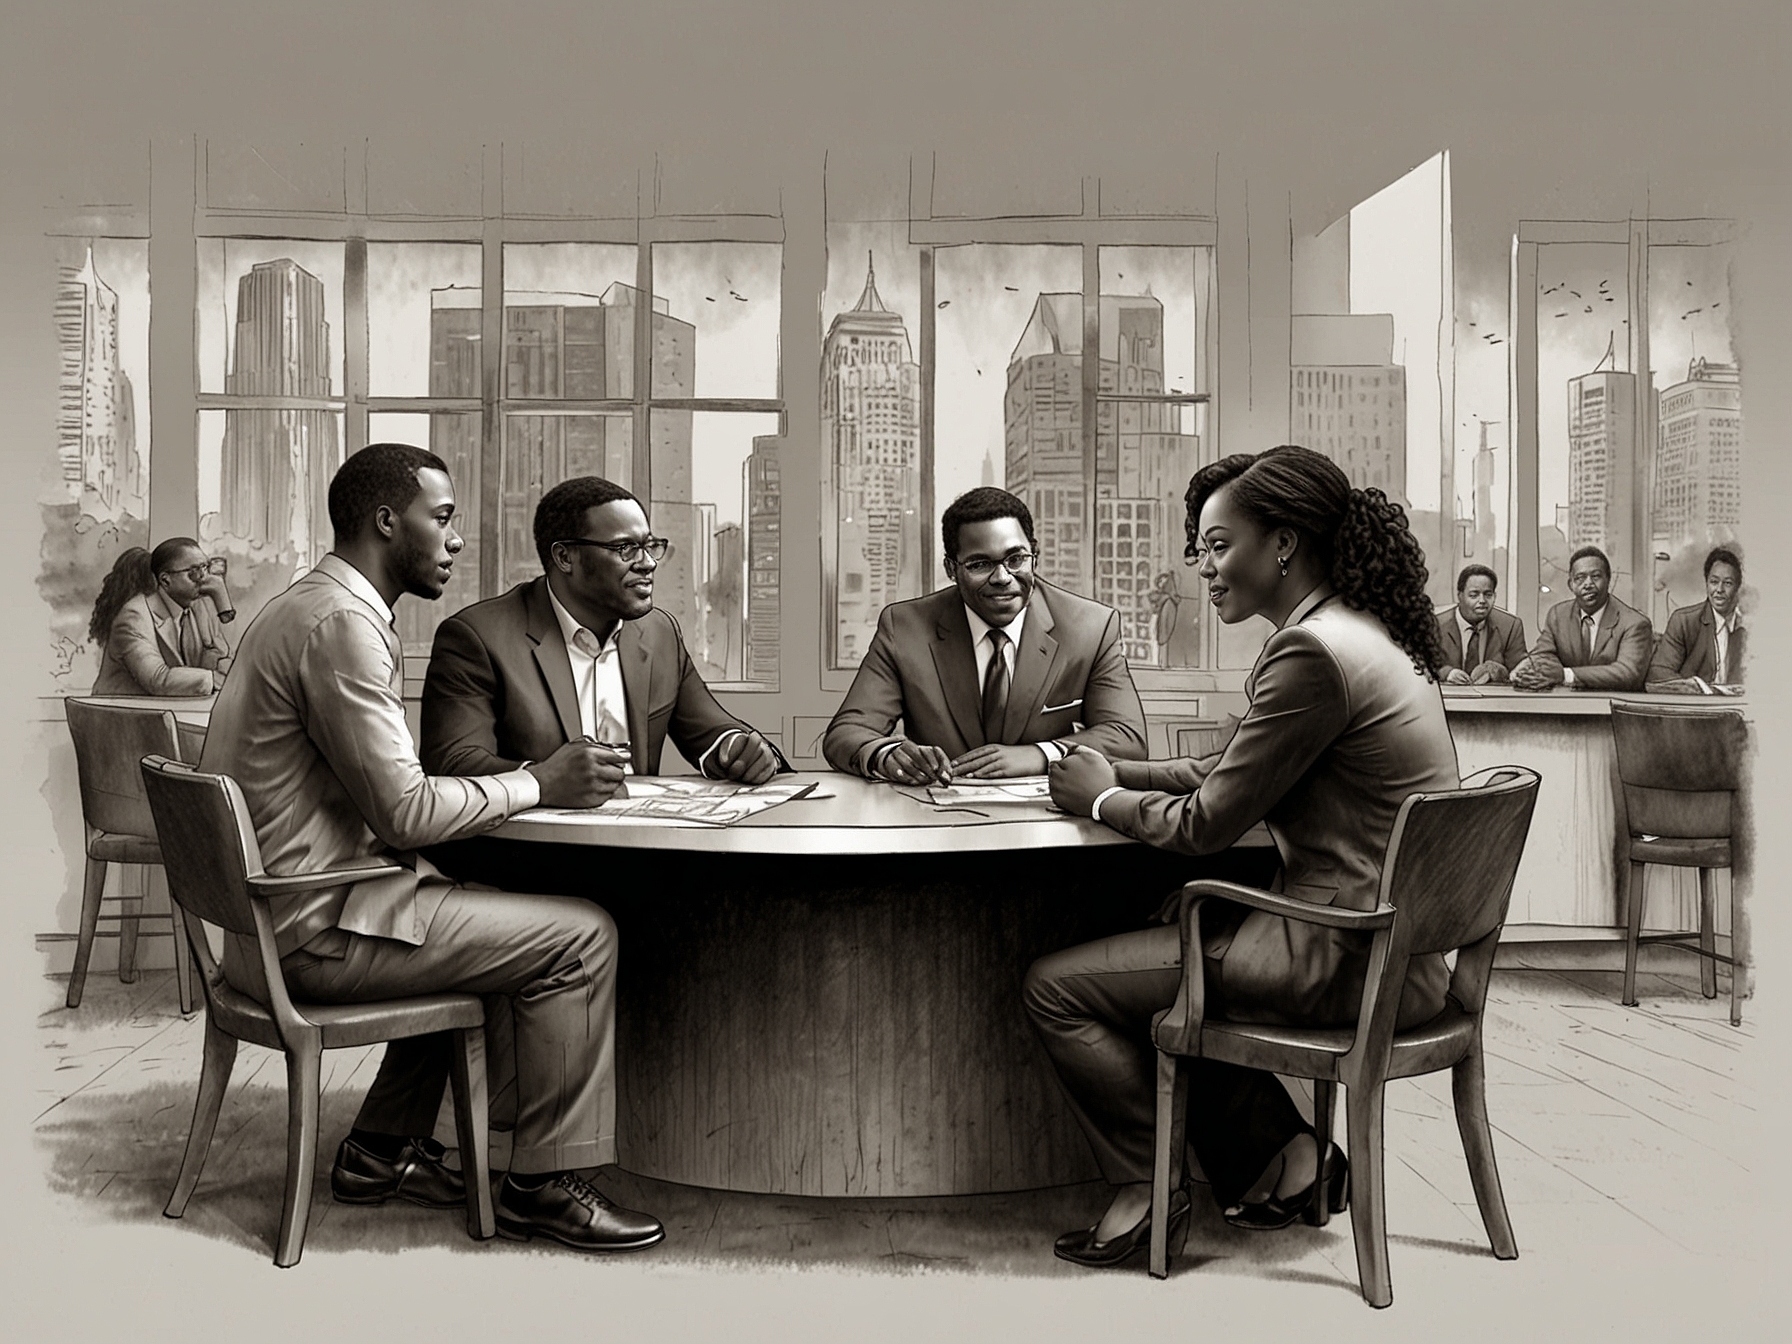 An illustration of diverse Atlanta entrepreneurs discussing social issues, community development, and sustainability as part of their voting considerations.